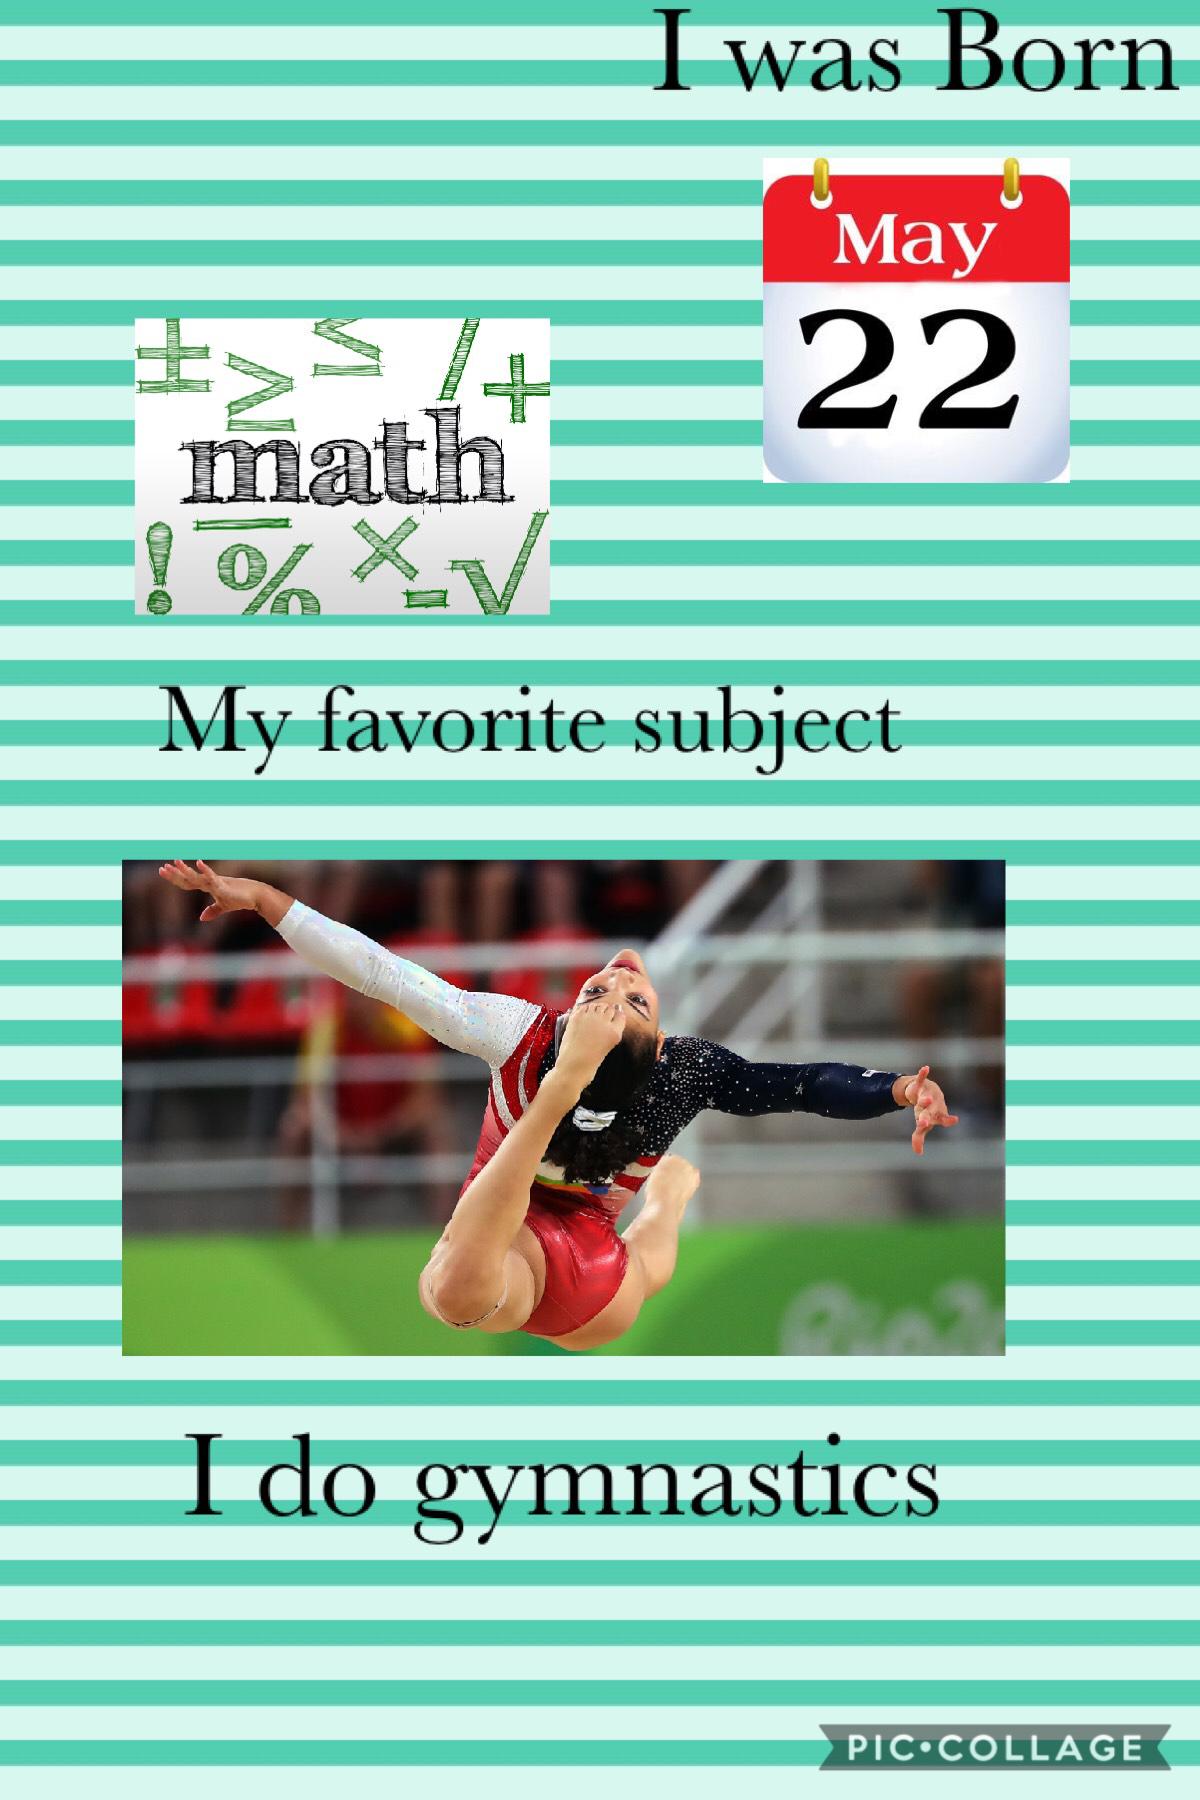 Collage by kristina5gymnast